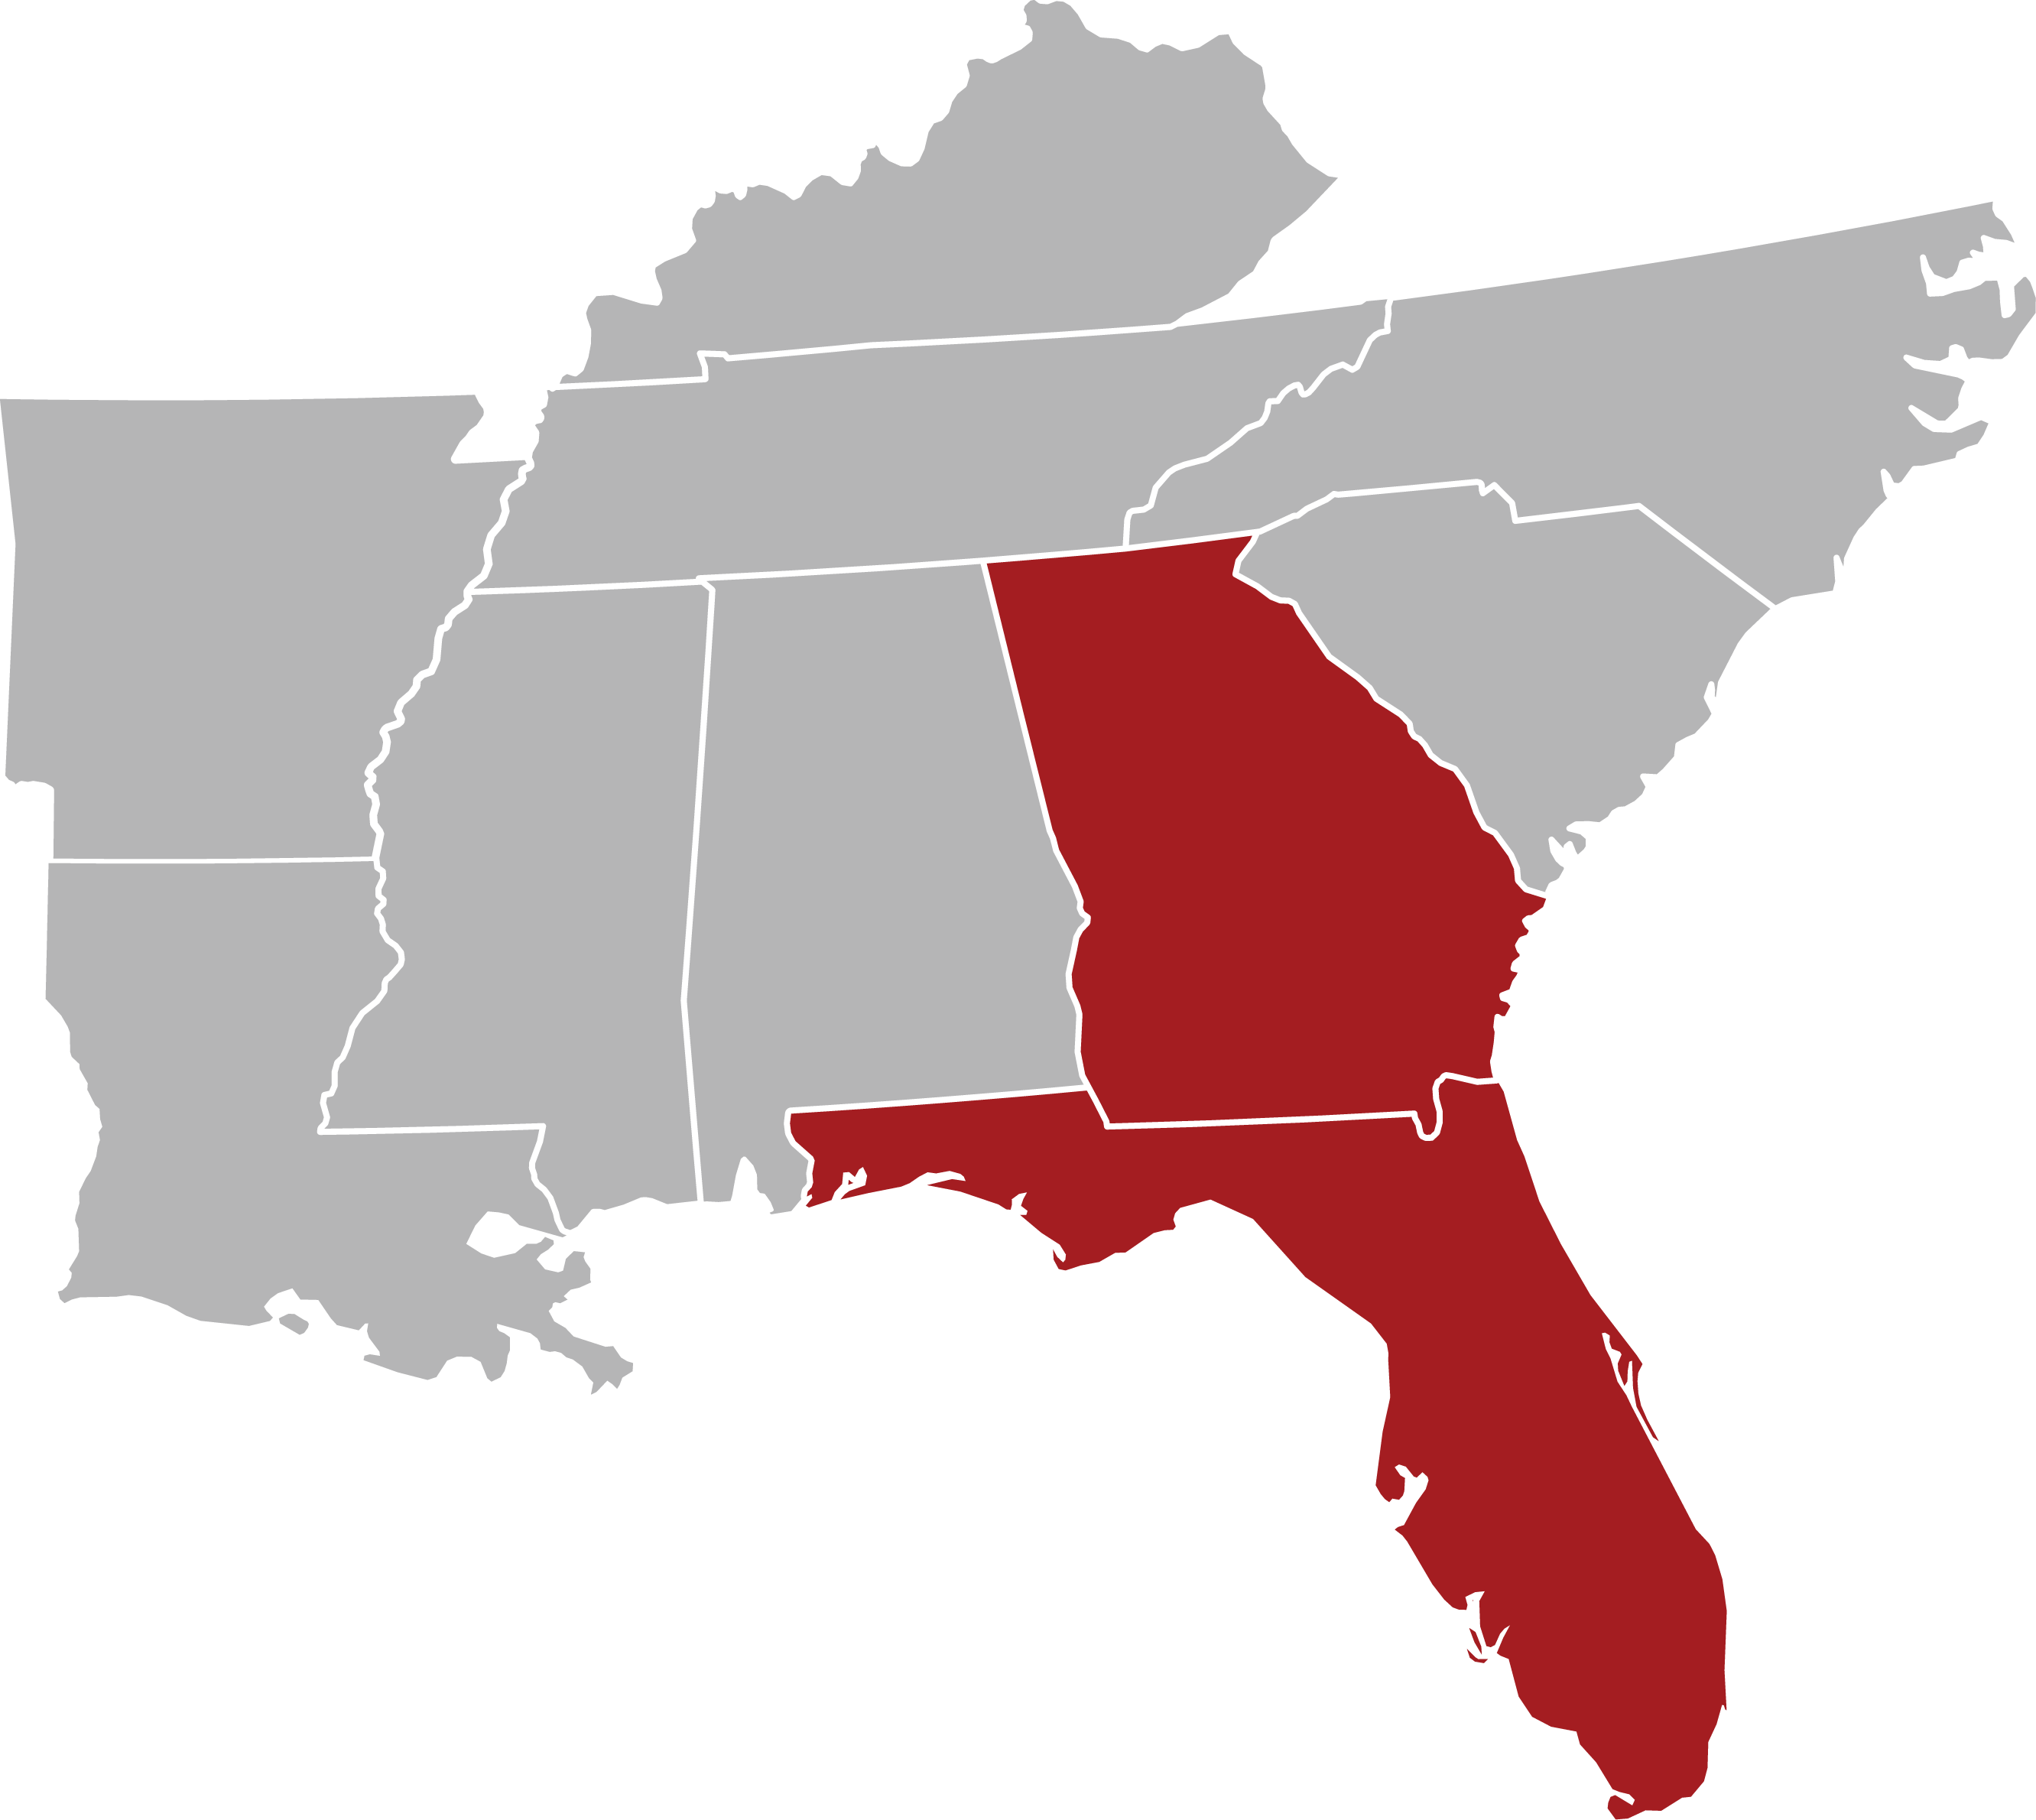 Map of the southeastern United States with Georgia and Florida highlighted in red.